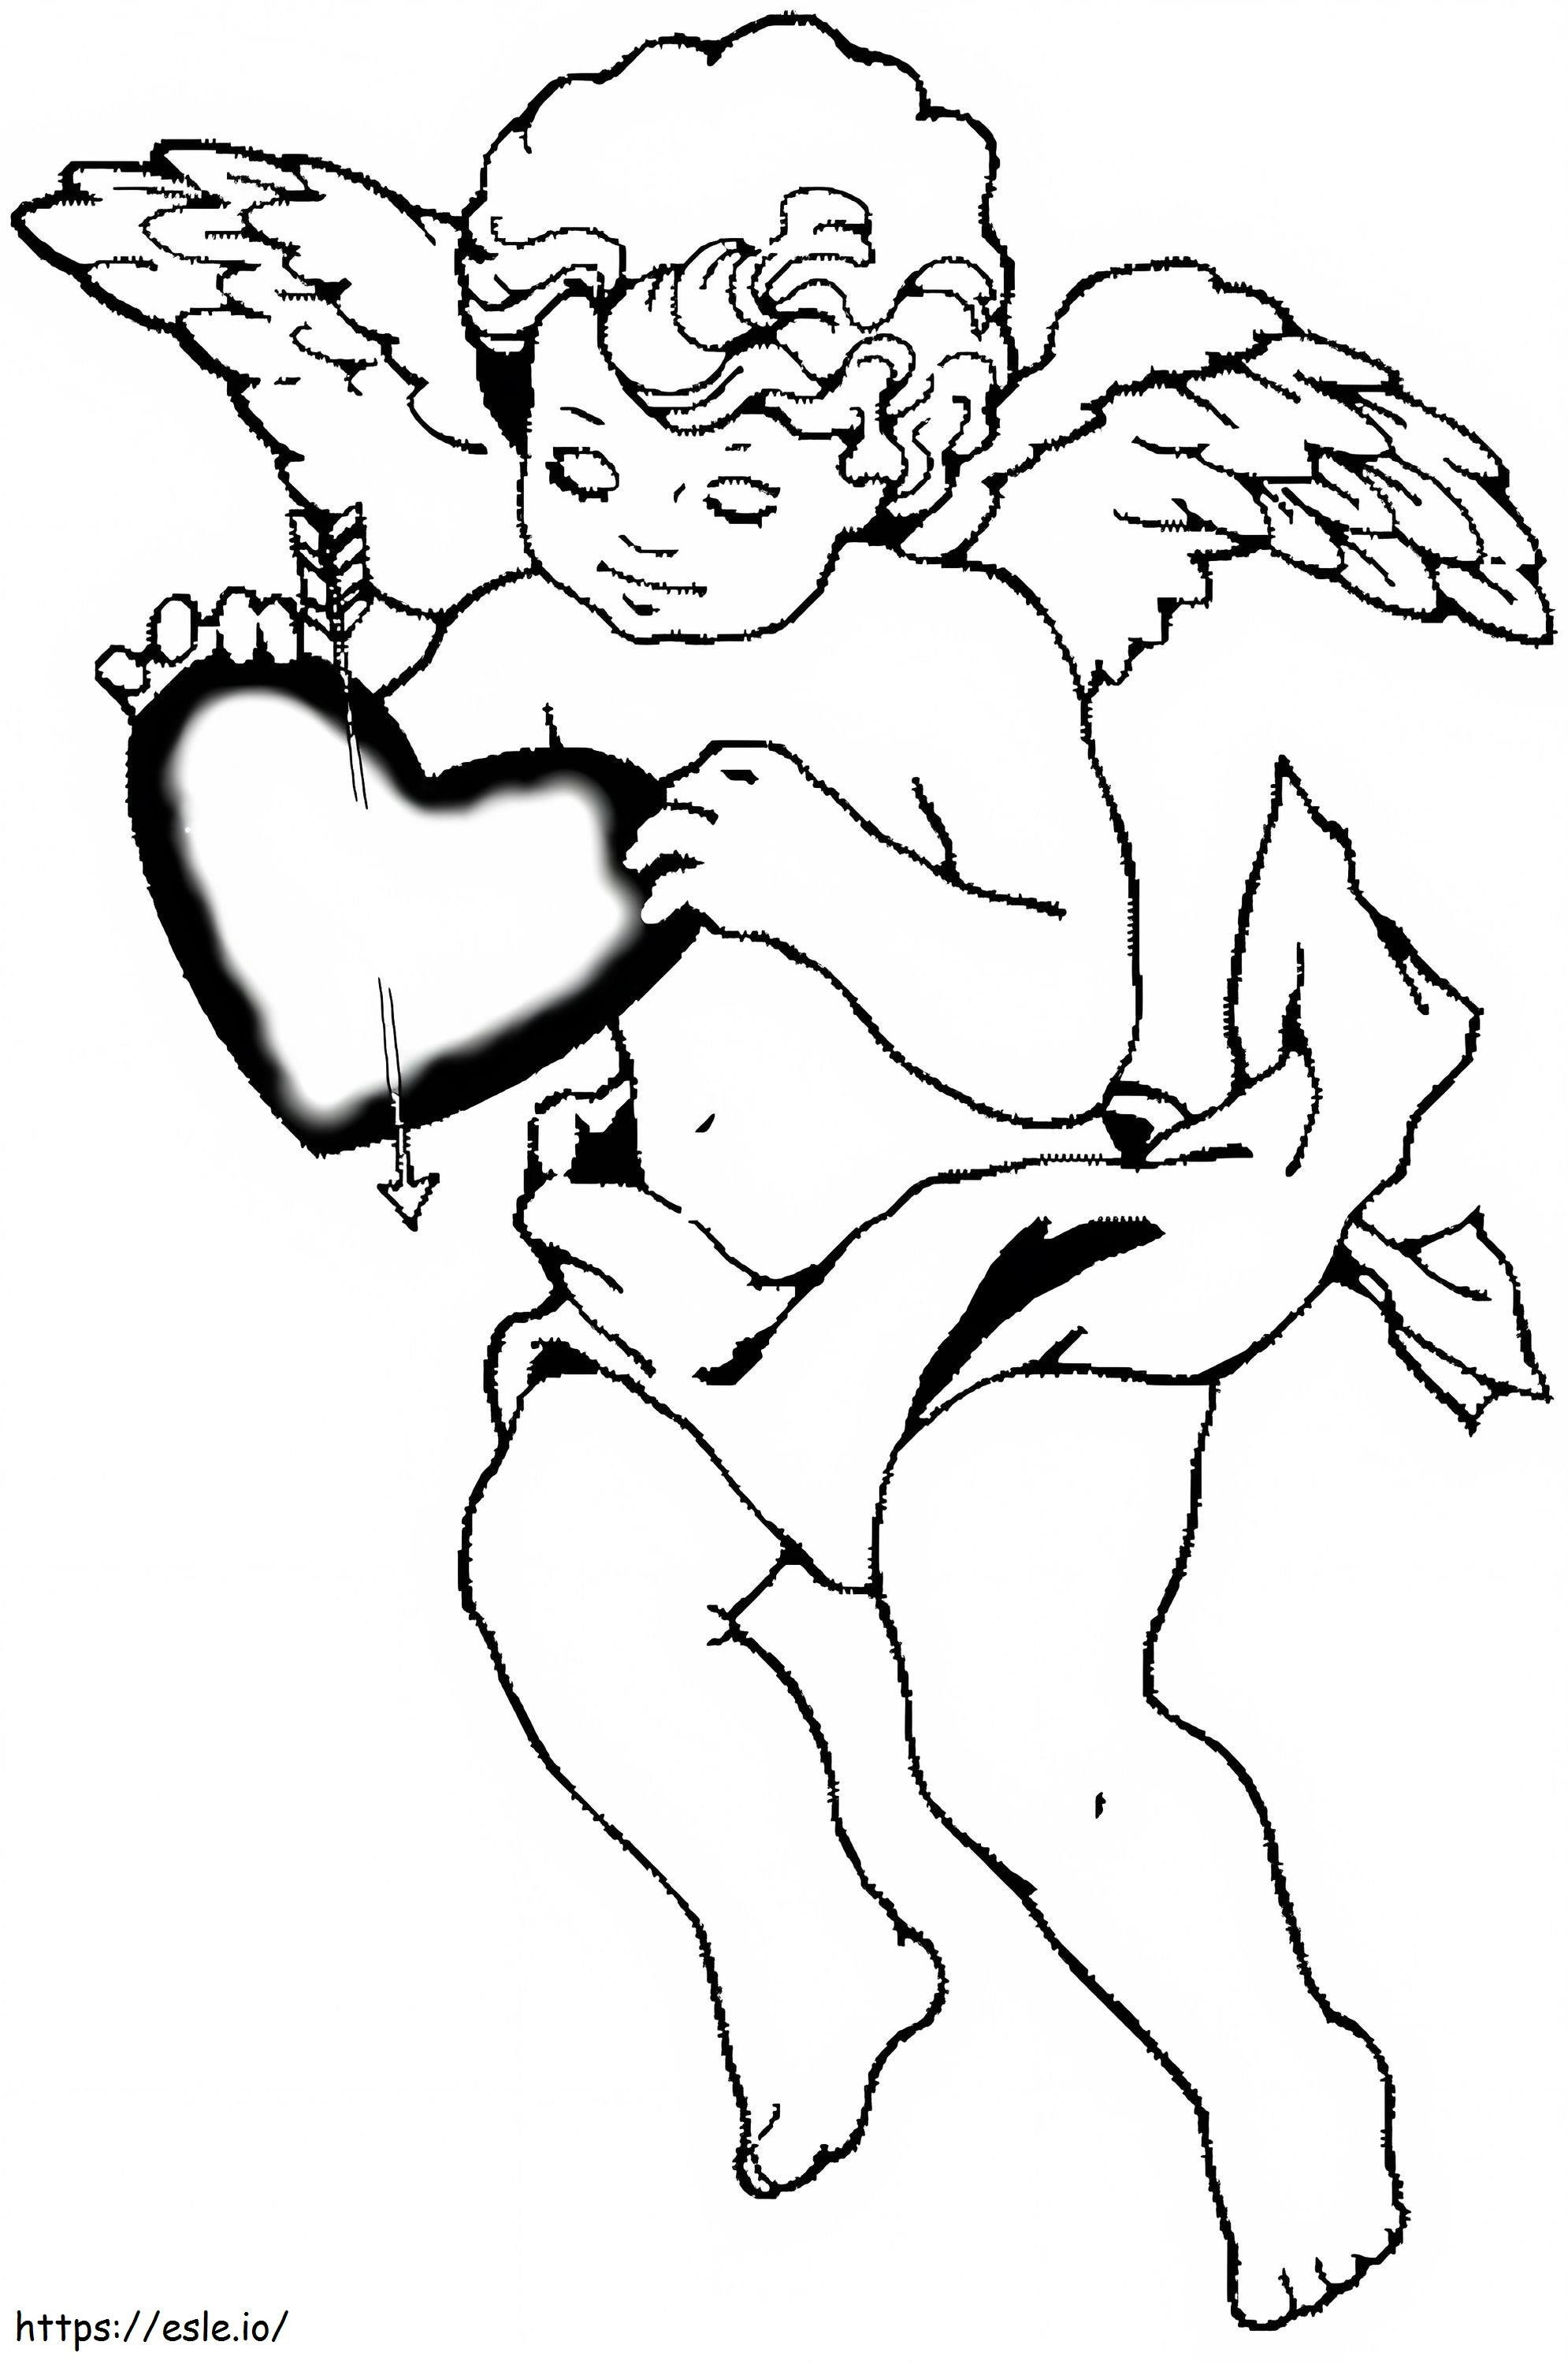 Cupid Holding Heart coloring page